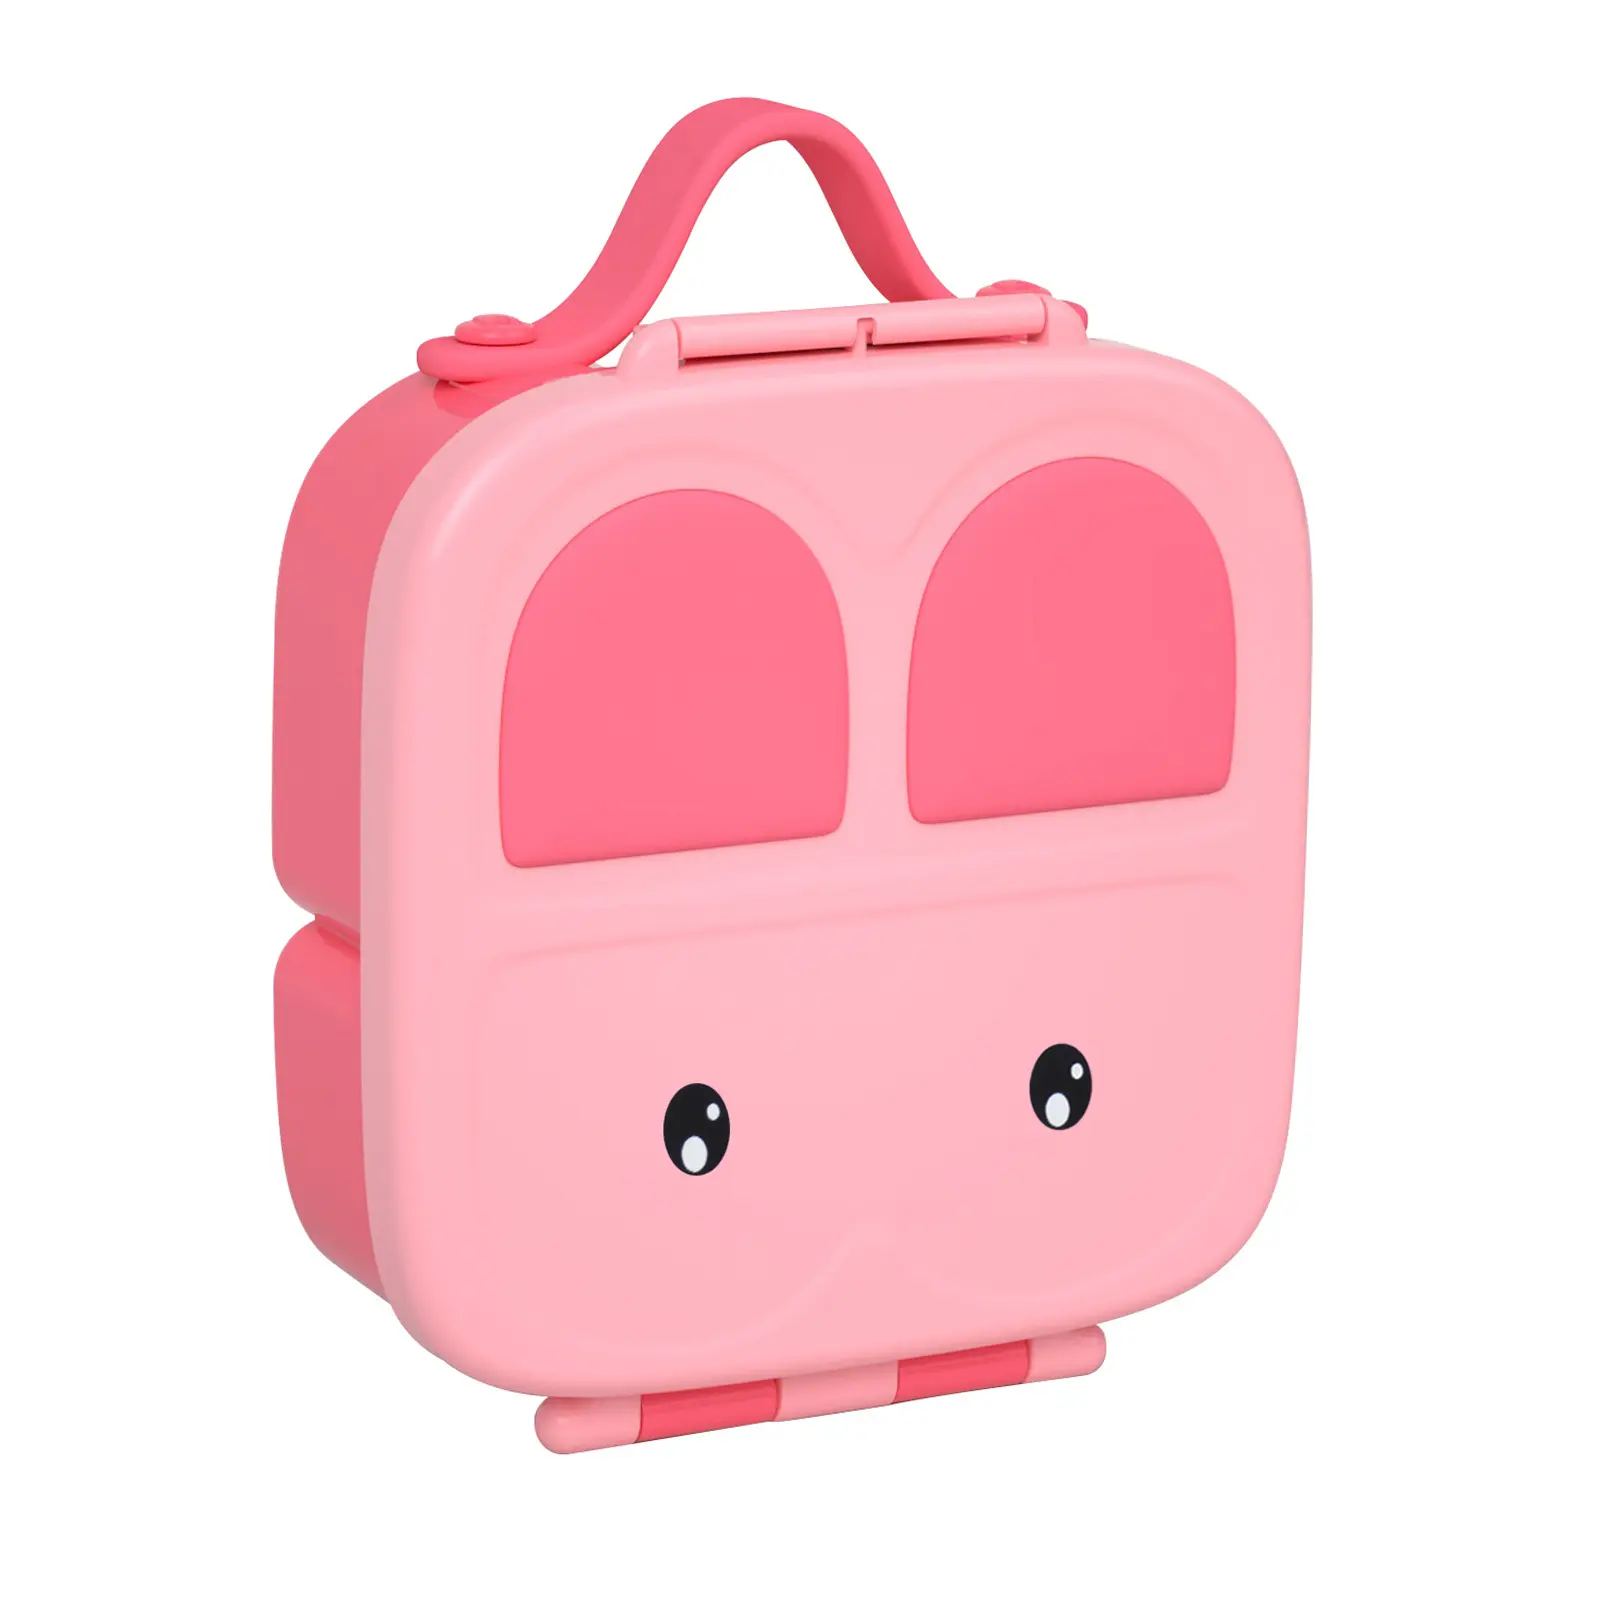 T2183 Bunny children's bento box Plastic student lunch box Portable partition can be microwave heated lunch box